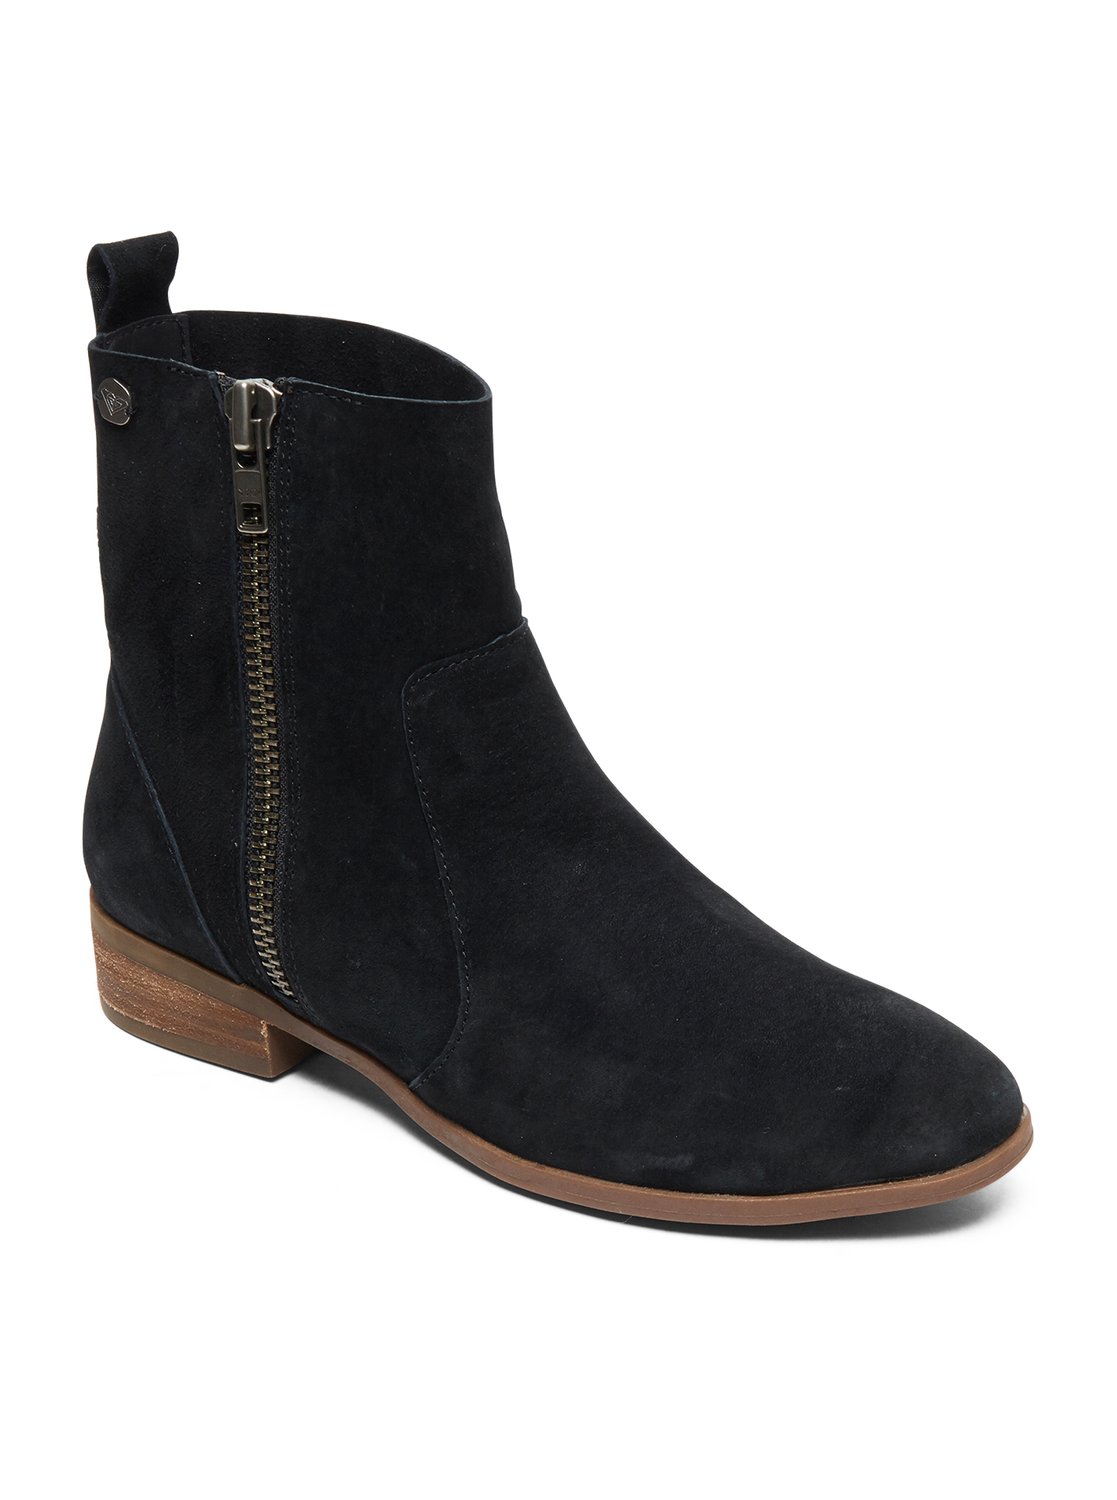 Eloise Suede Boots